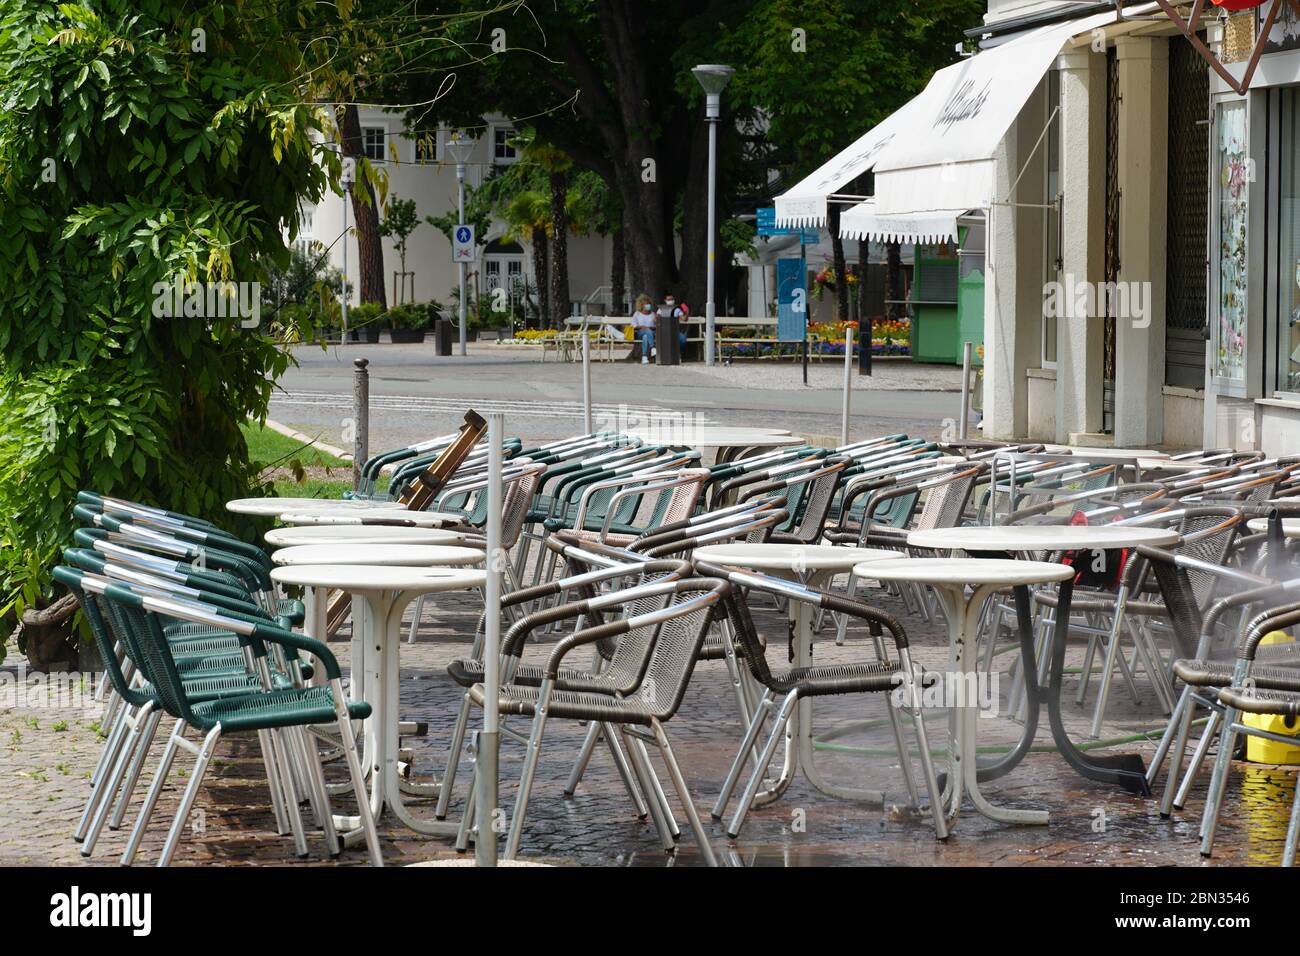 Italian restaurants in Merano, South Tyrol, are still closed because of COVID-19. Chairs and tables stacked up and chained together. Stock Photo